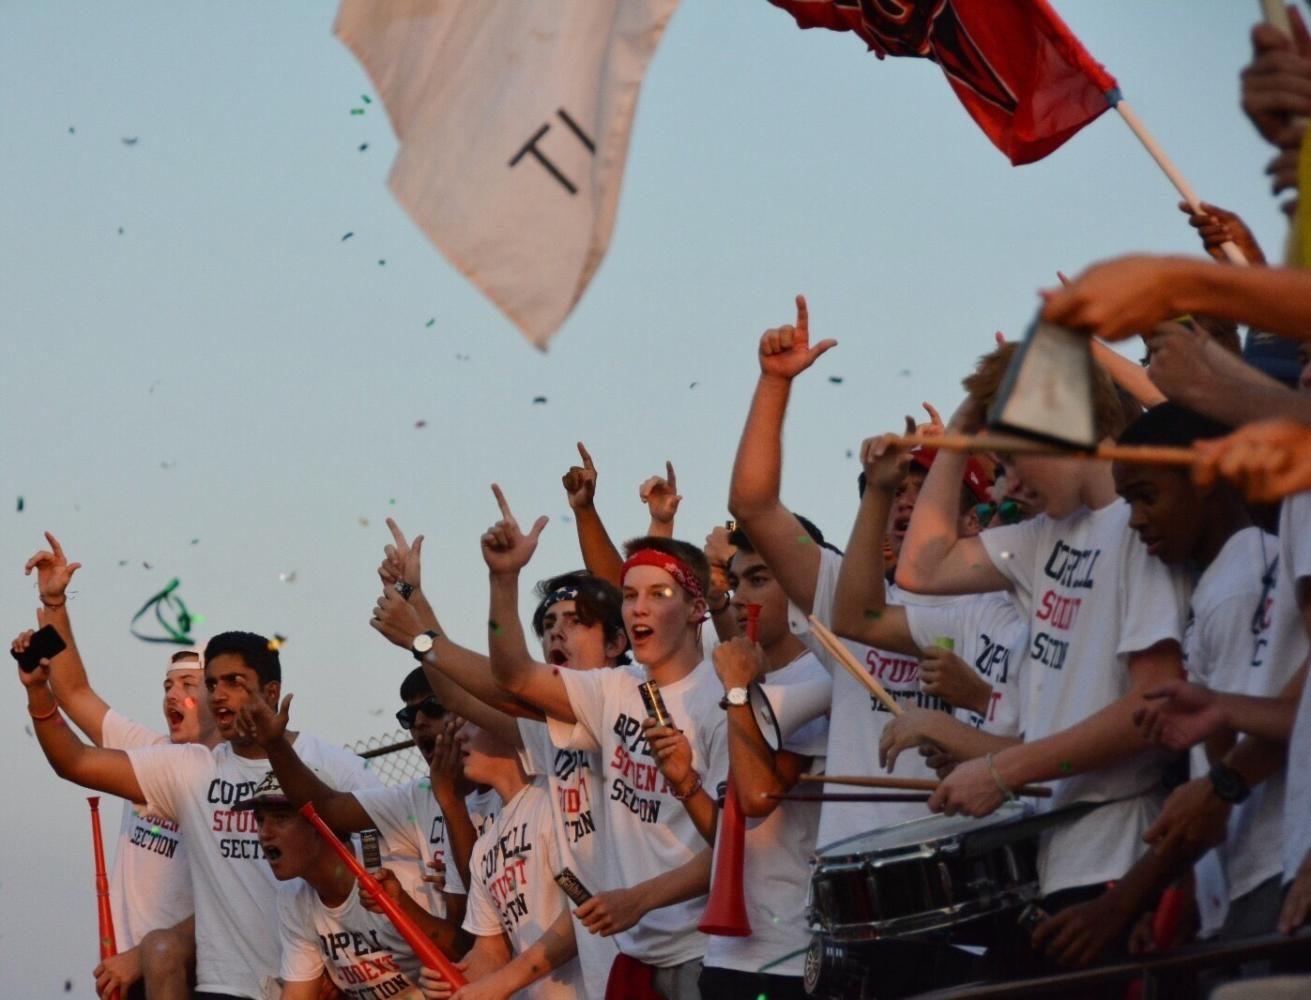 The+Coppell+Student+Section+showers+the+field+with+confetti+and+the+sound+of+cow+bells+as+they+cheer+on+the+Coppell+Cowboys+at+HEB+Pennington+Field+on+Sept.+1.+Many+Coppell+Students+dress+up+in+funny+costumes%2C+such+as+dinosaurs%2C+teletubbies+and+hotdogs%2C+as+the+Cowboys+defeated+L.D.+Bell%2C+58-23.